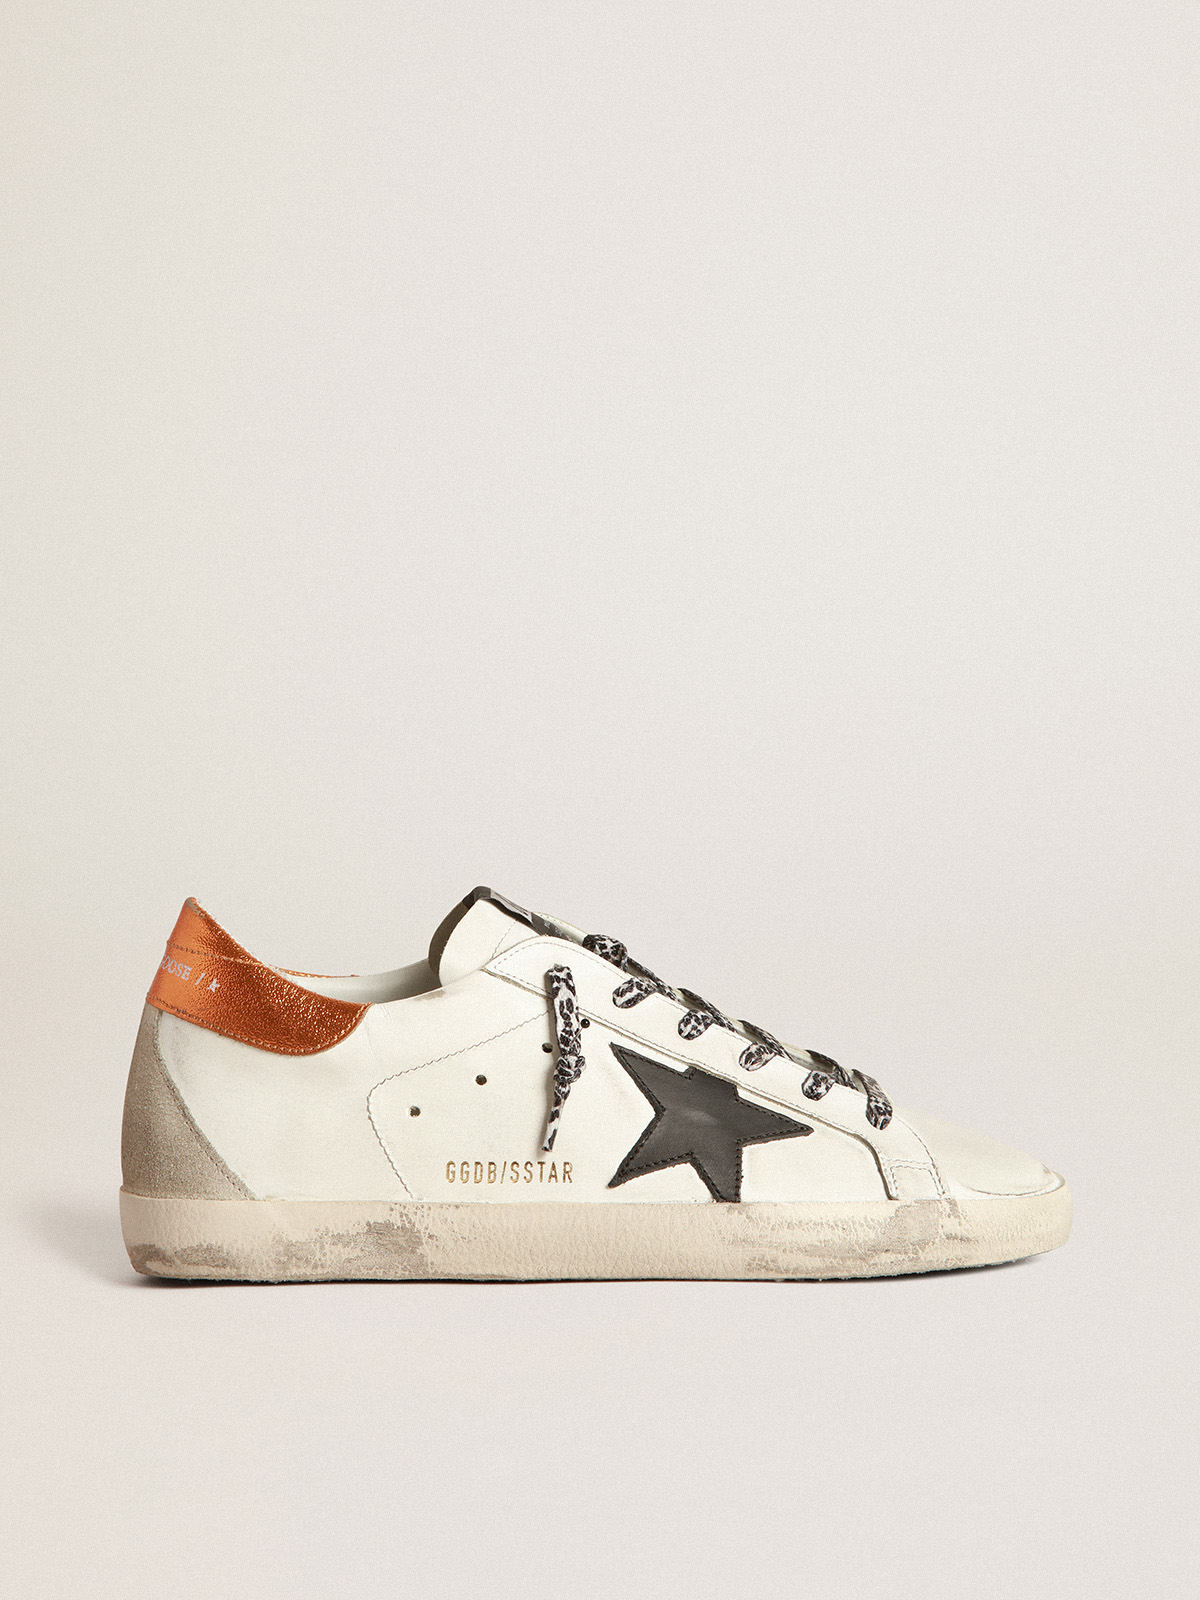 White Super-Star sneakers with black star and leopard-print laces